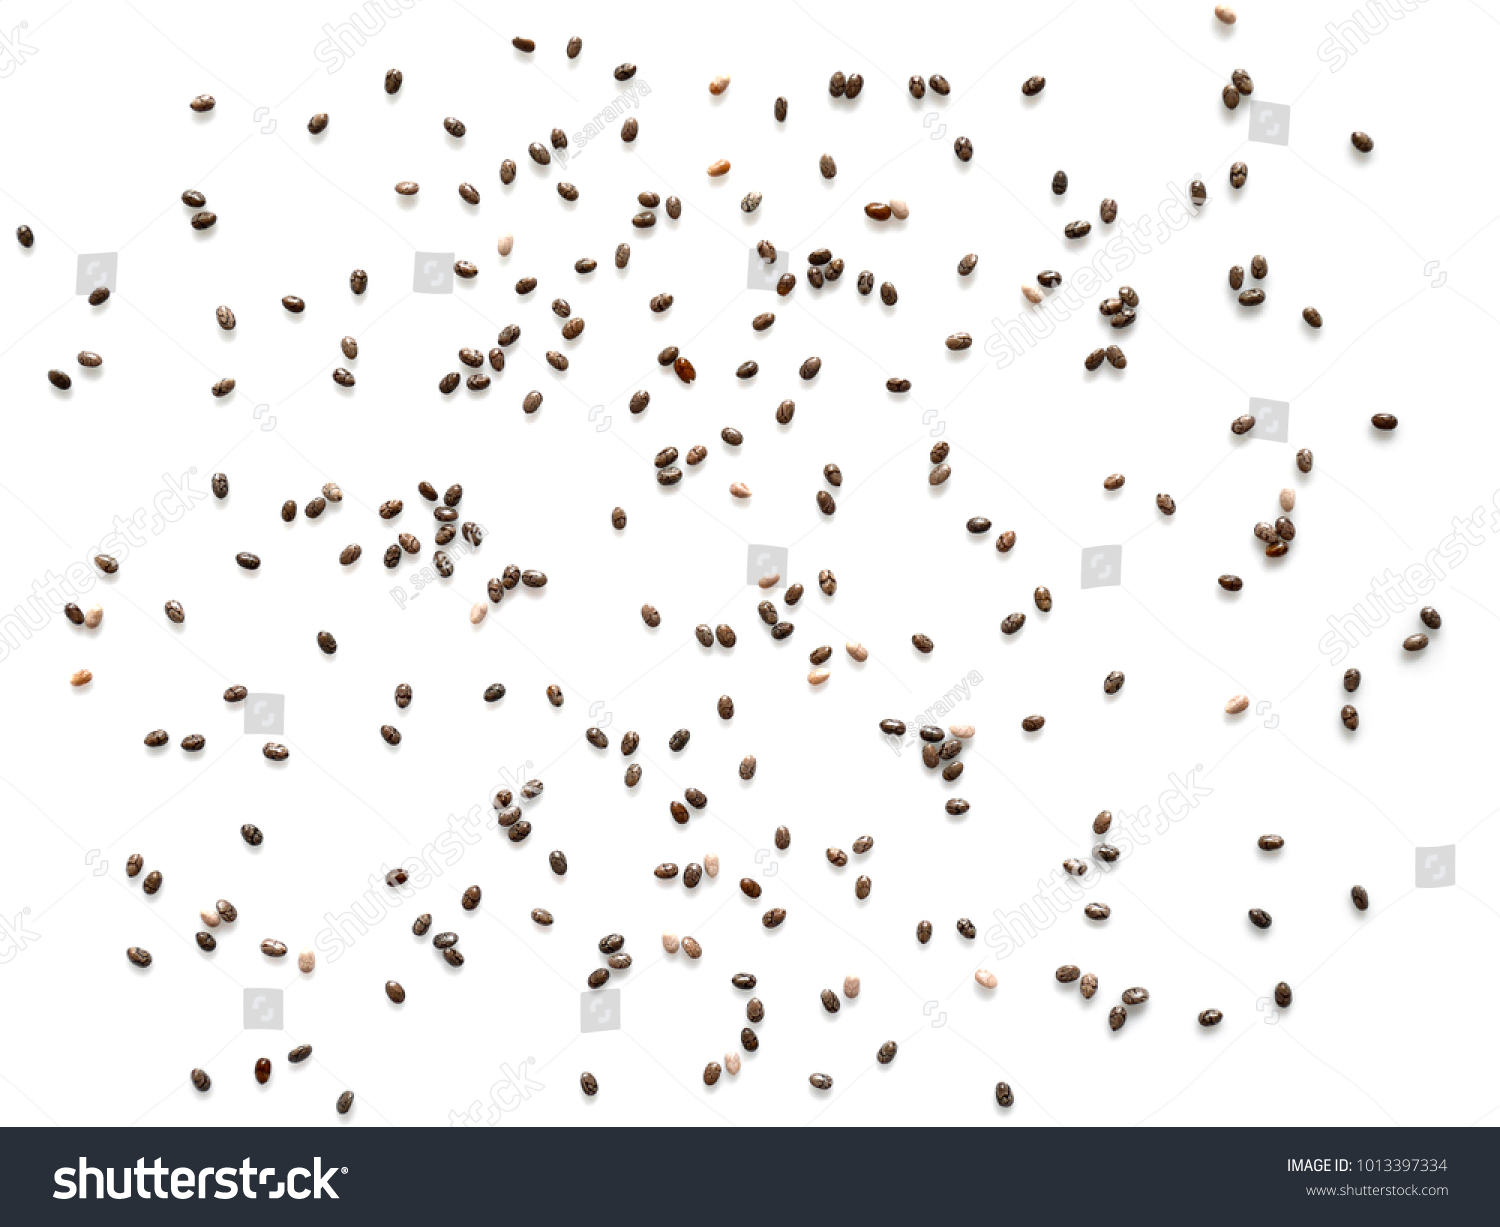 Chia seeds isolated on white background. Top view. #1013397334